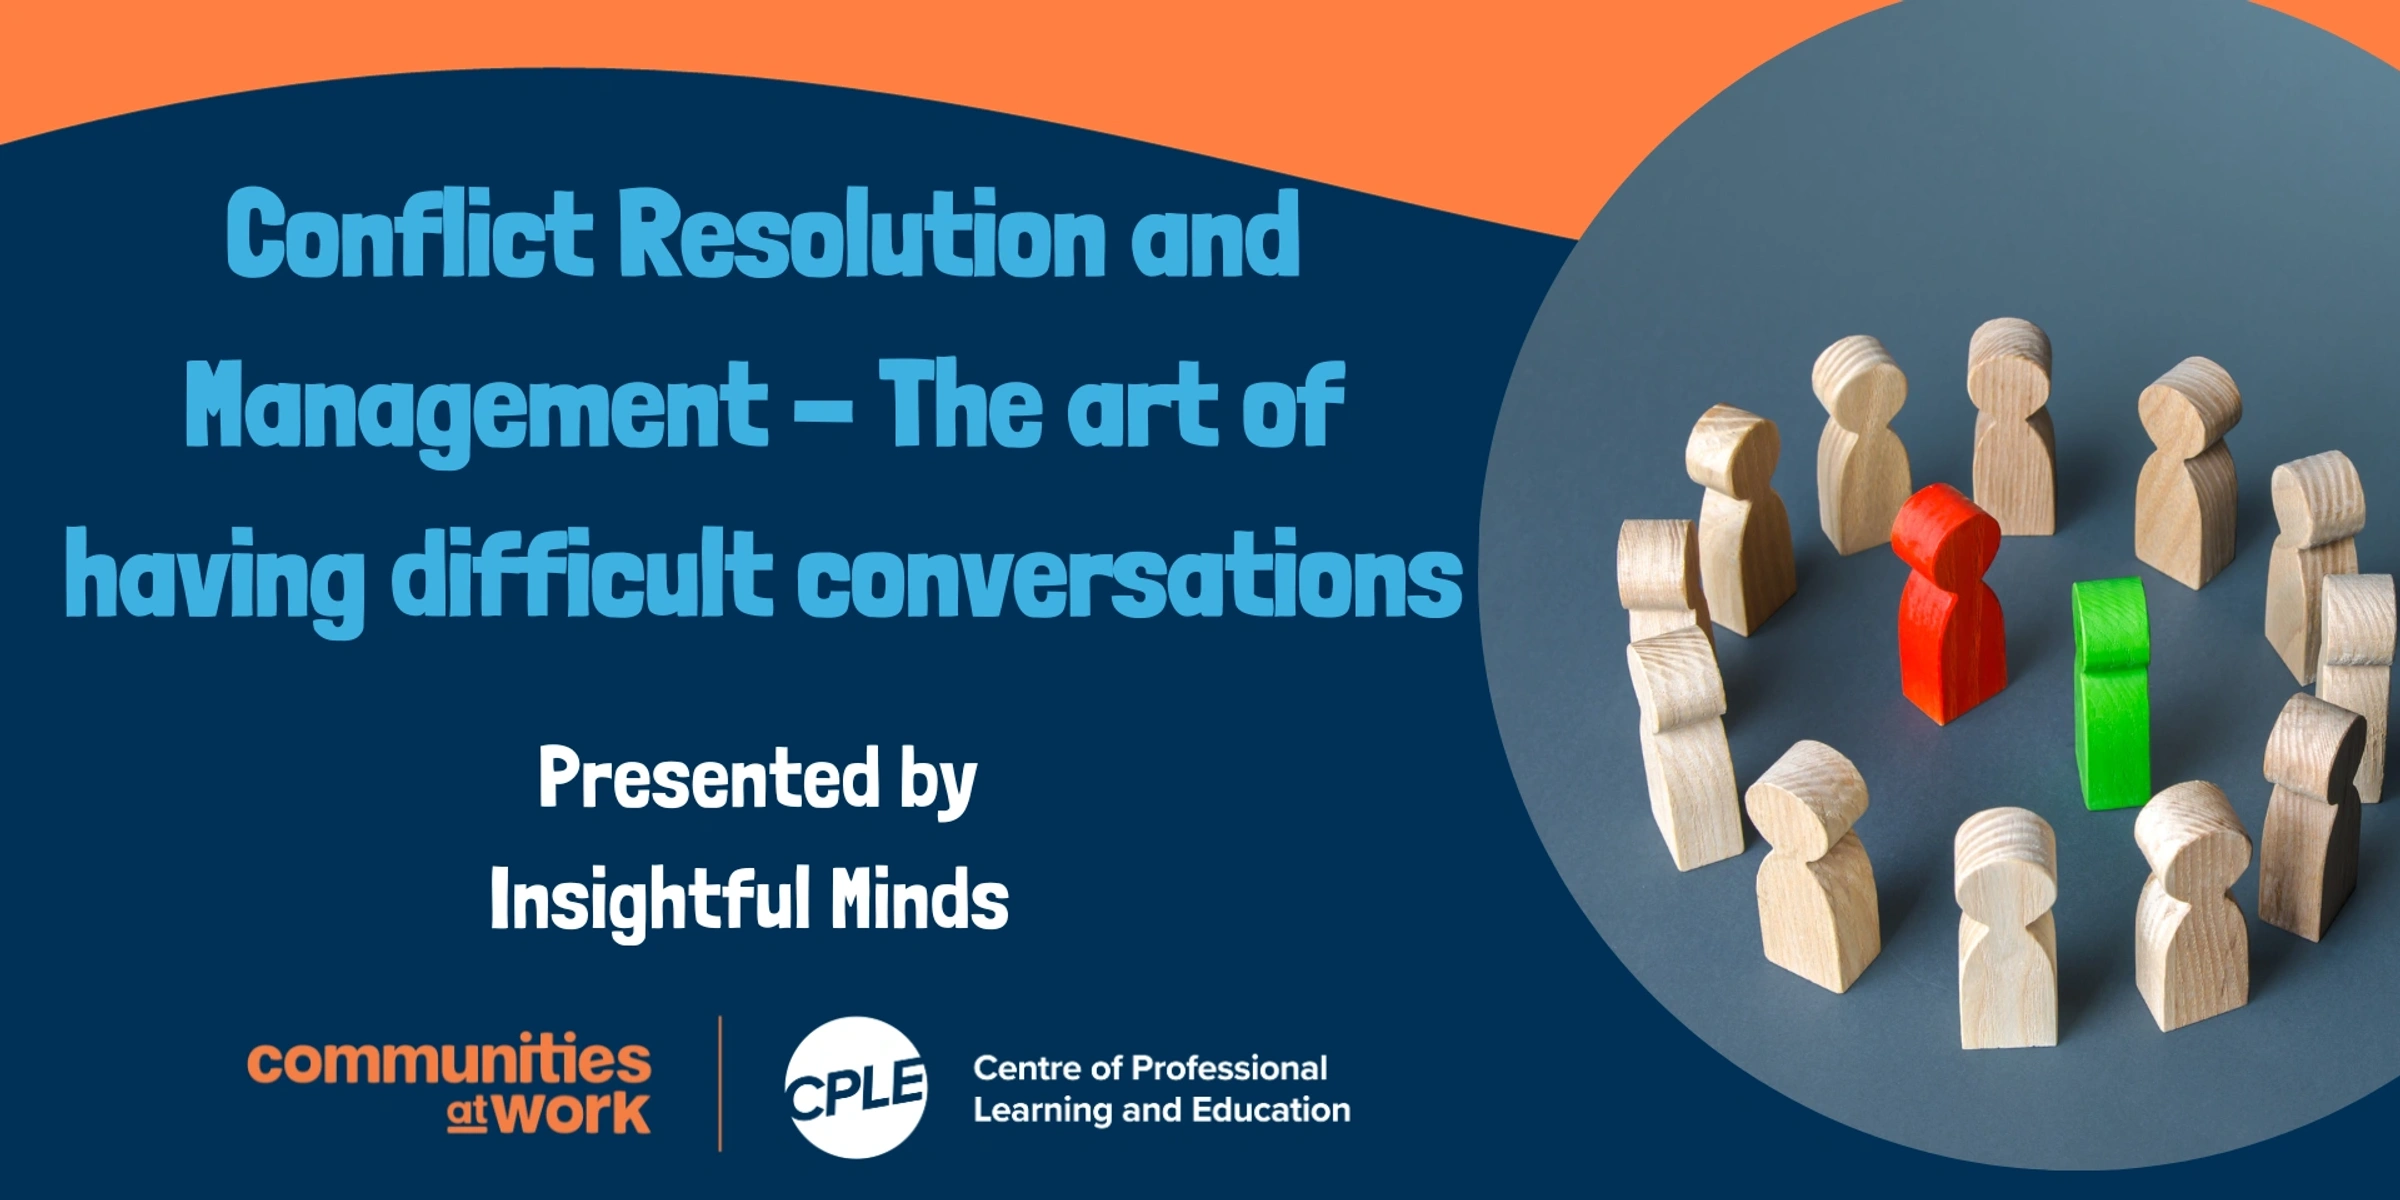  CPLE_Conflict-Resolution-and-Management-the-art-of-having-difficult-conversations_9thAugust_Communities_at_Work